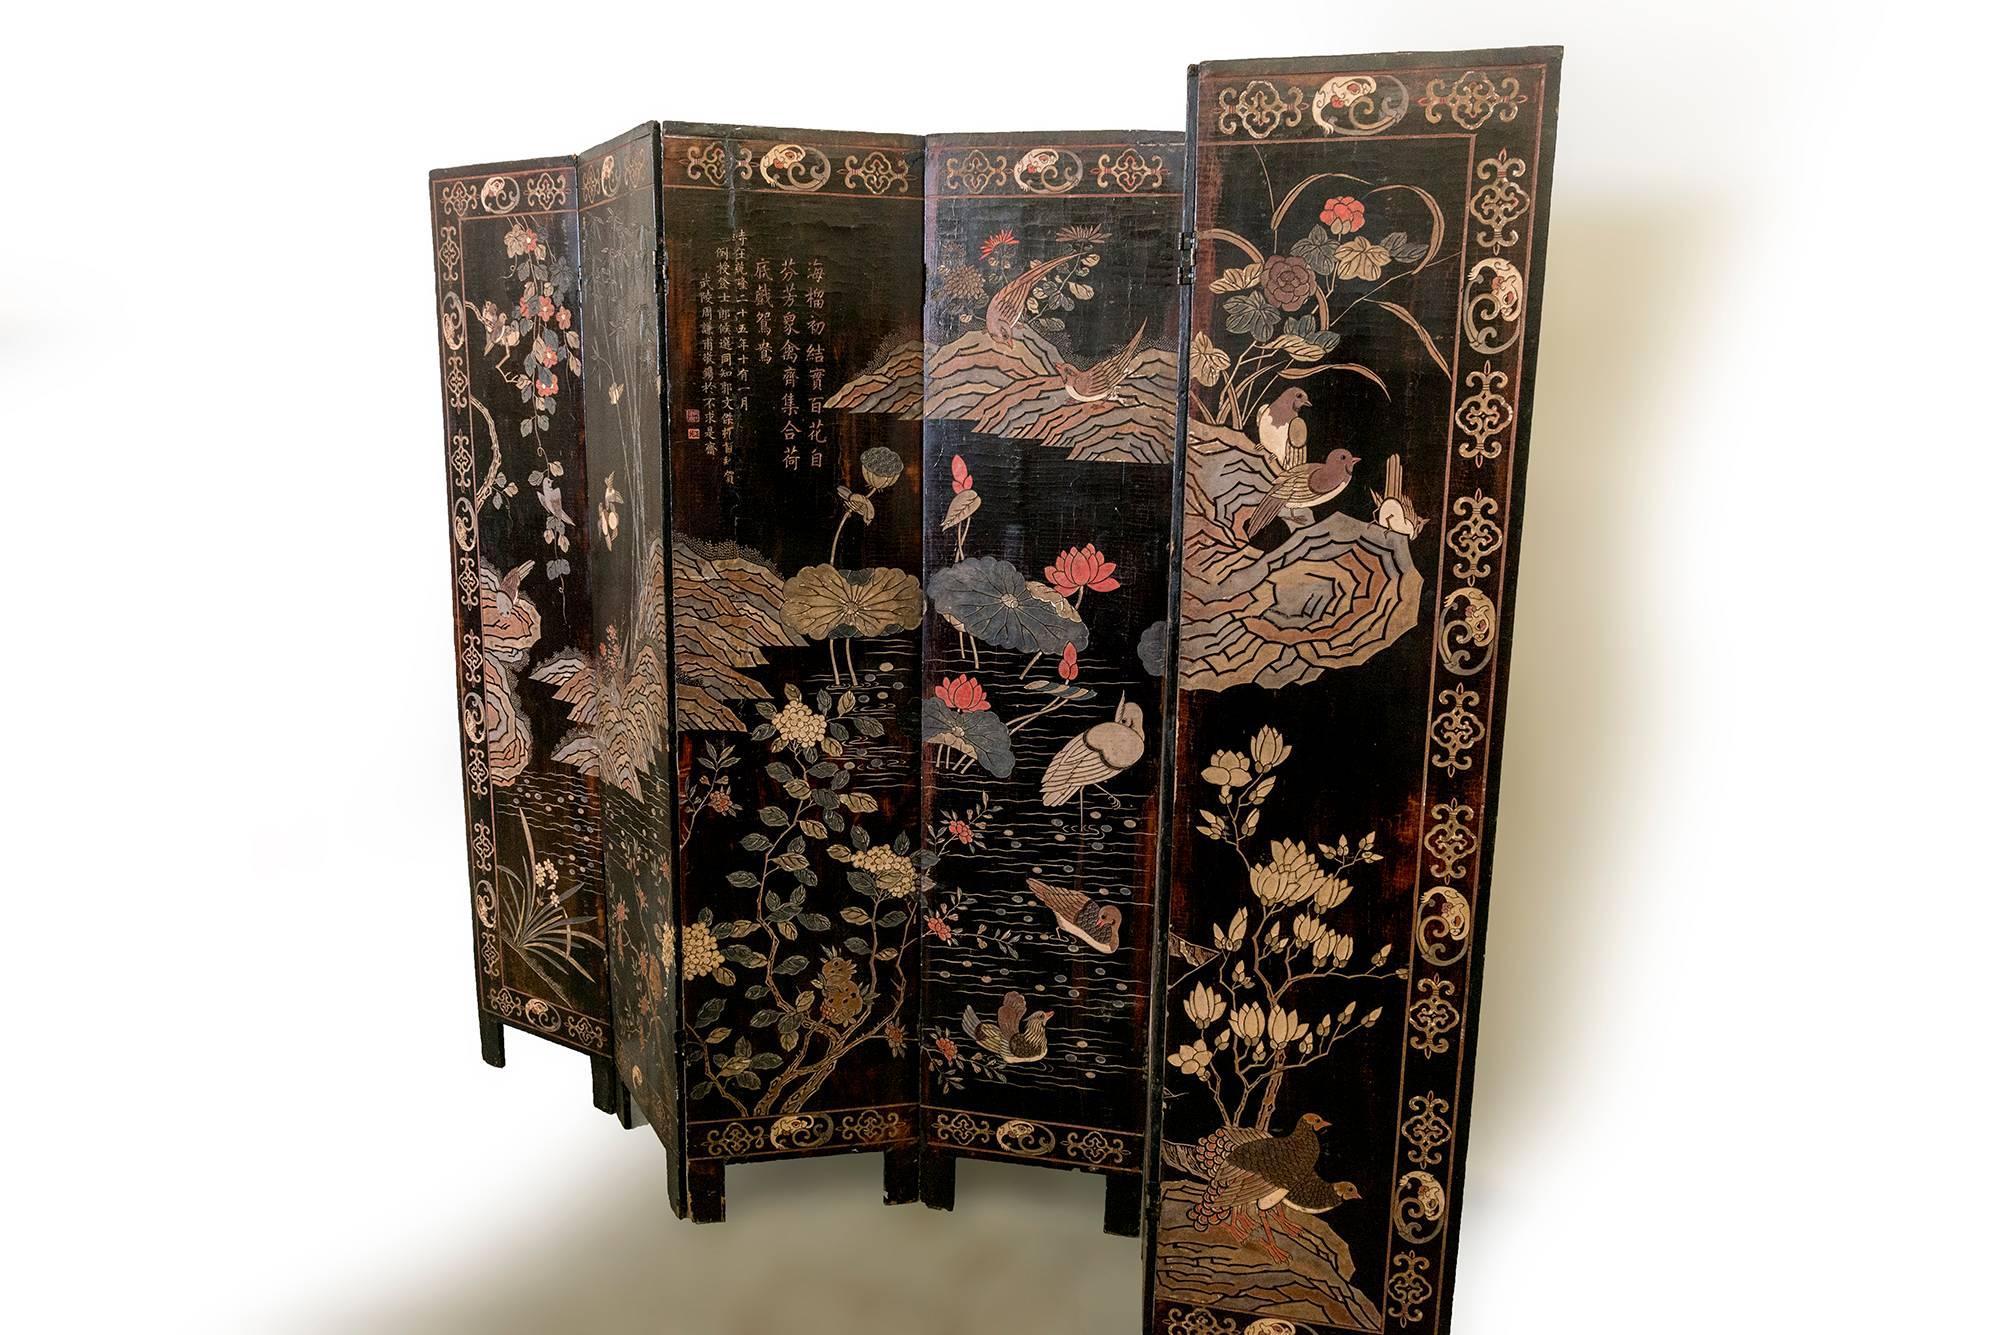 Six-panel double sided coromandel screen telling Chinese stories written in Hanzi characters. One side depicts Imperial court ladies in various activities; the other side depicts exotic birds in a Lotus pond. Signs of harmony, vitality, and